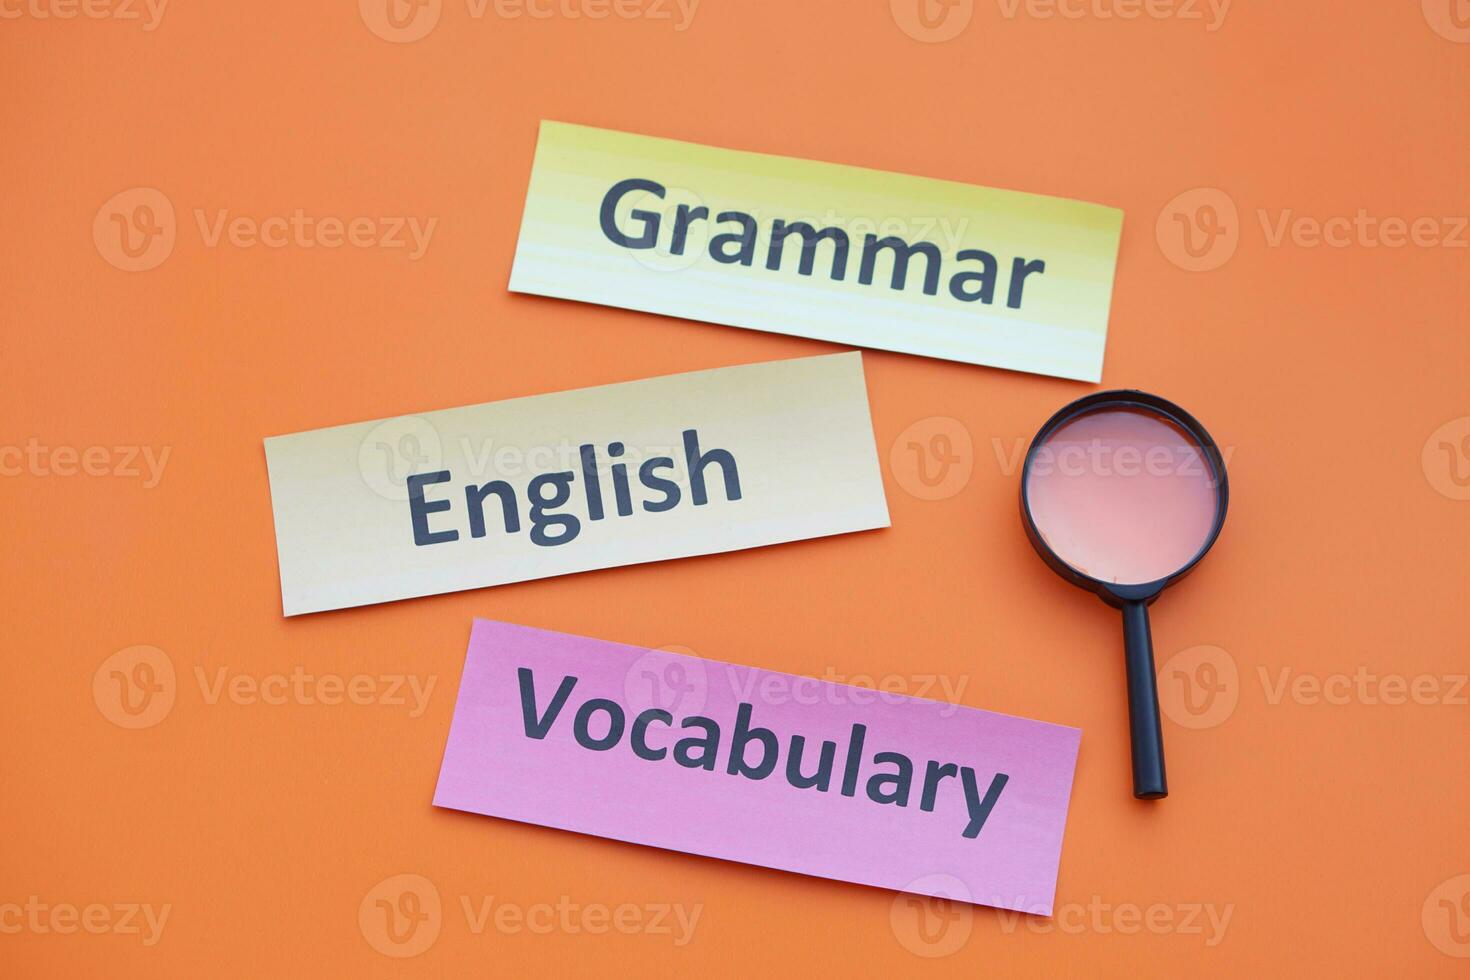 Paper word cards with text Vocabulary, English, Grammar. Magnifying glass. Orange background. Concept. Education material. Teaching aid. Learning language. photo